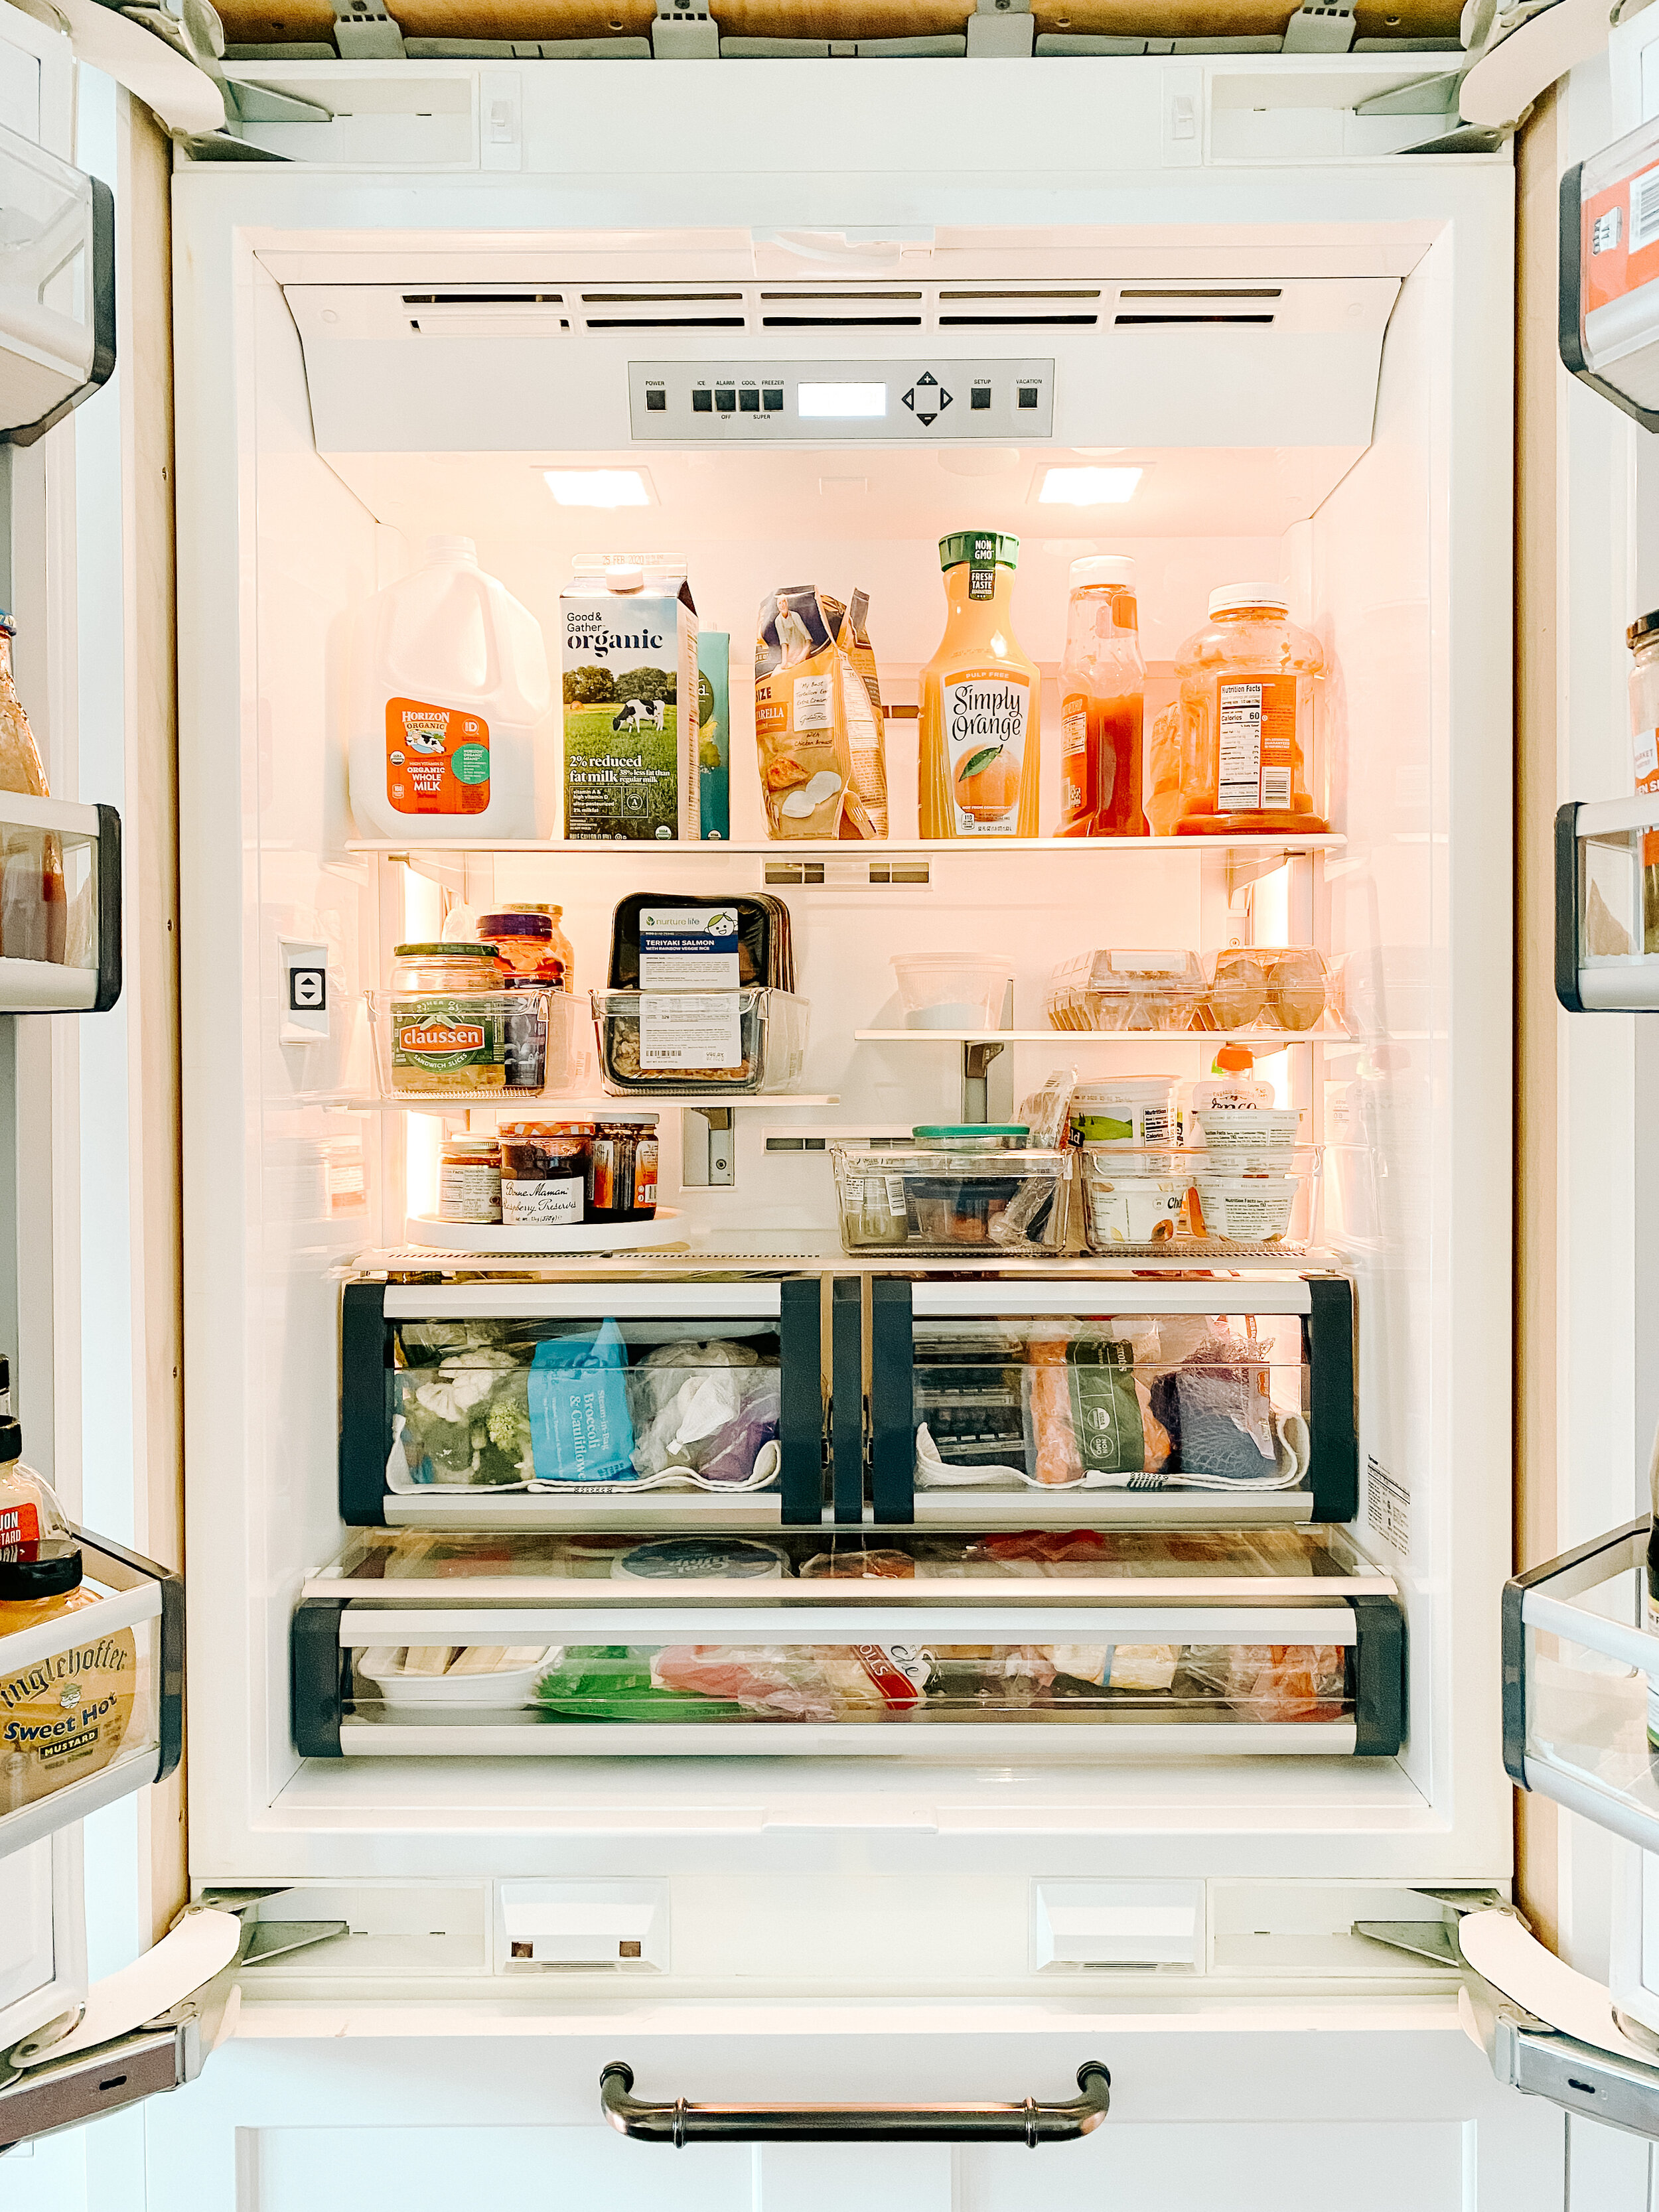 Our refrigerator AFTER the clean out! Click here for all the sources to help you tackle deep cleaning &amp; organizing your fridge.